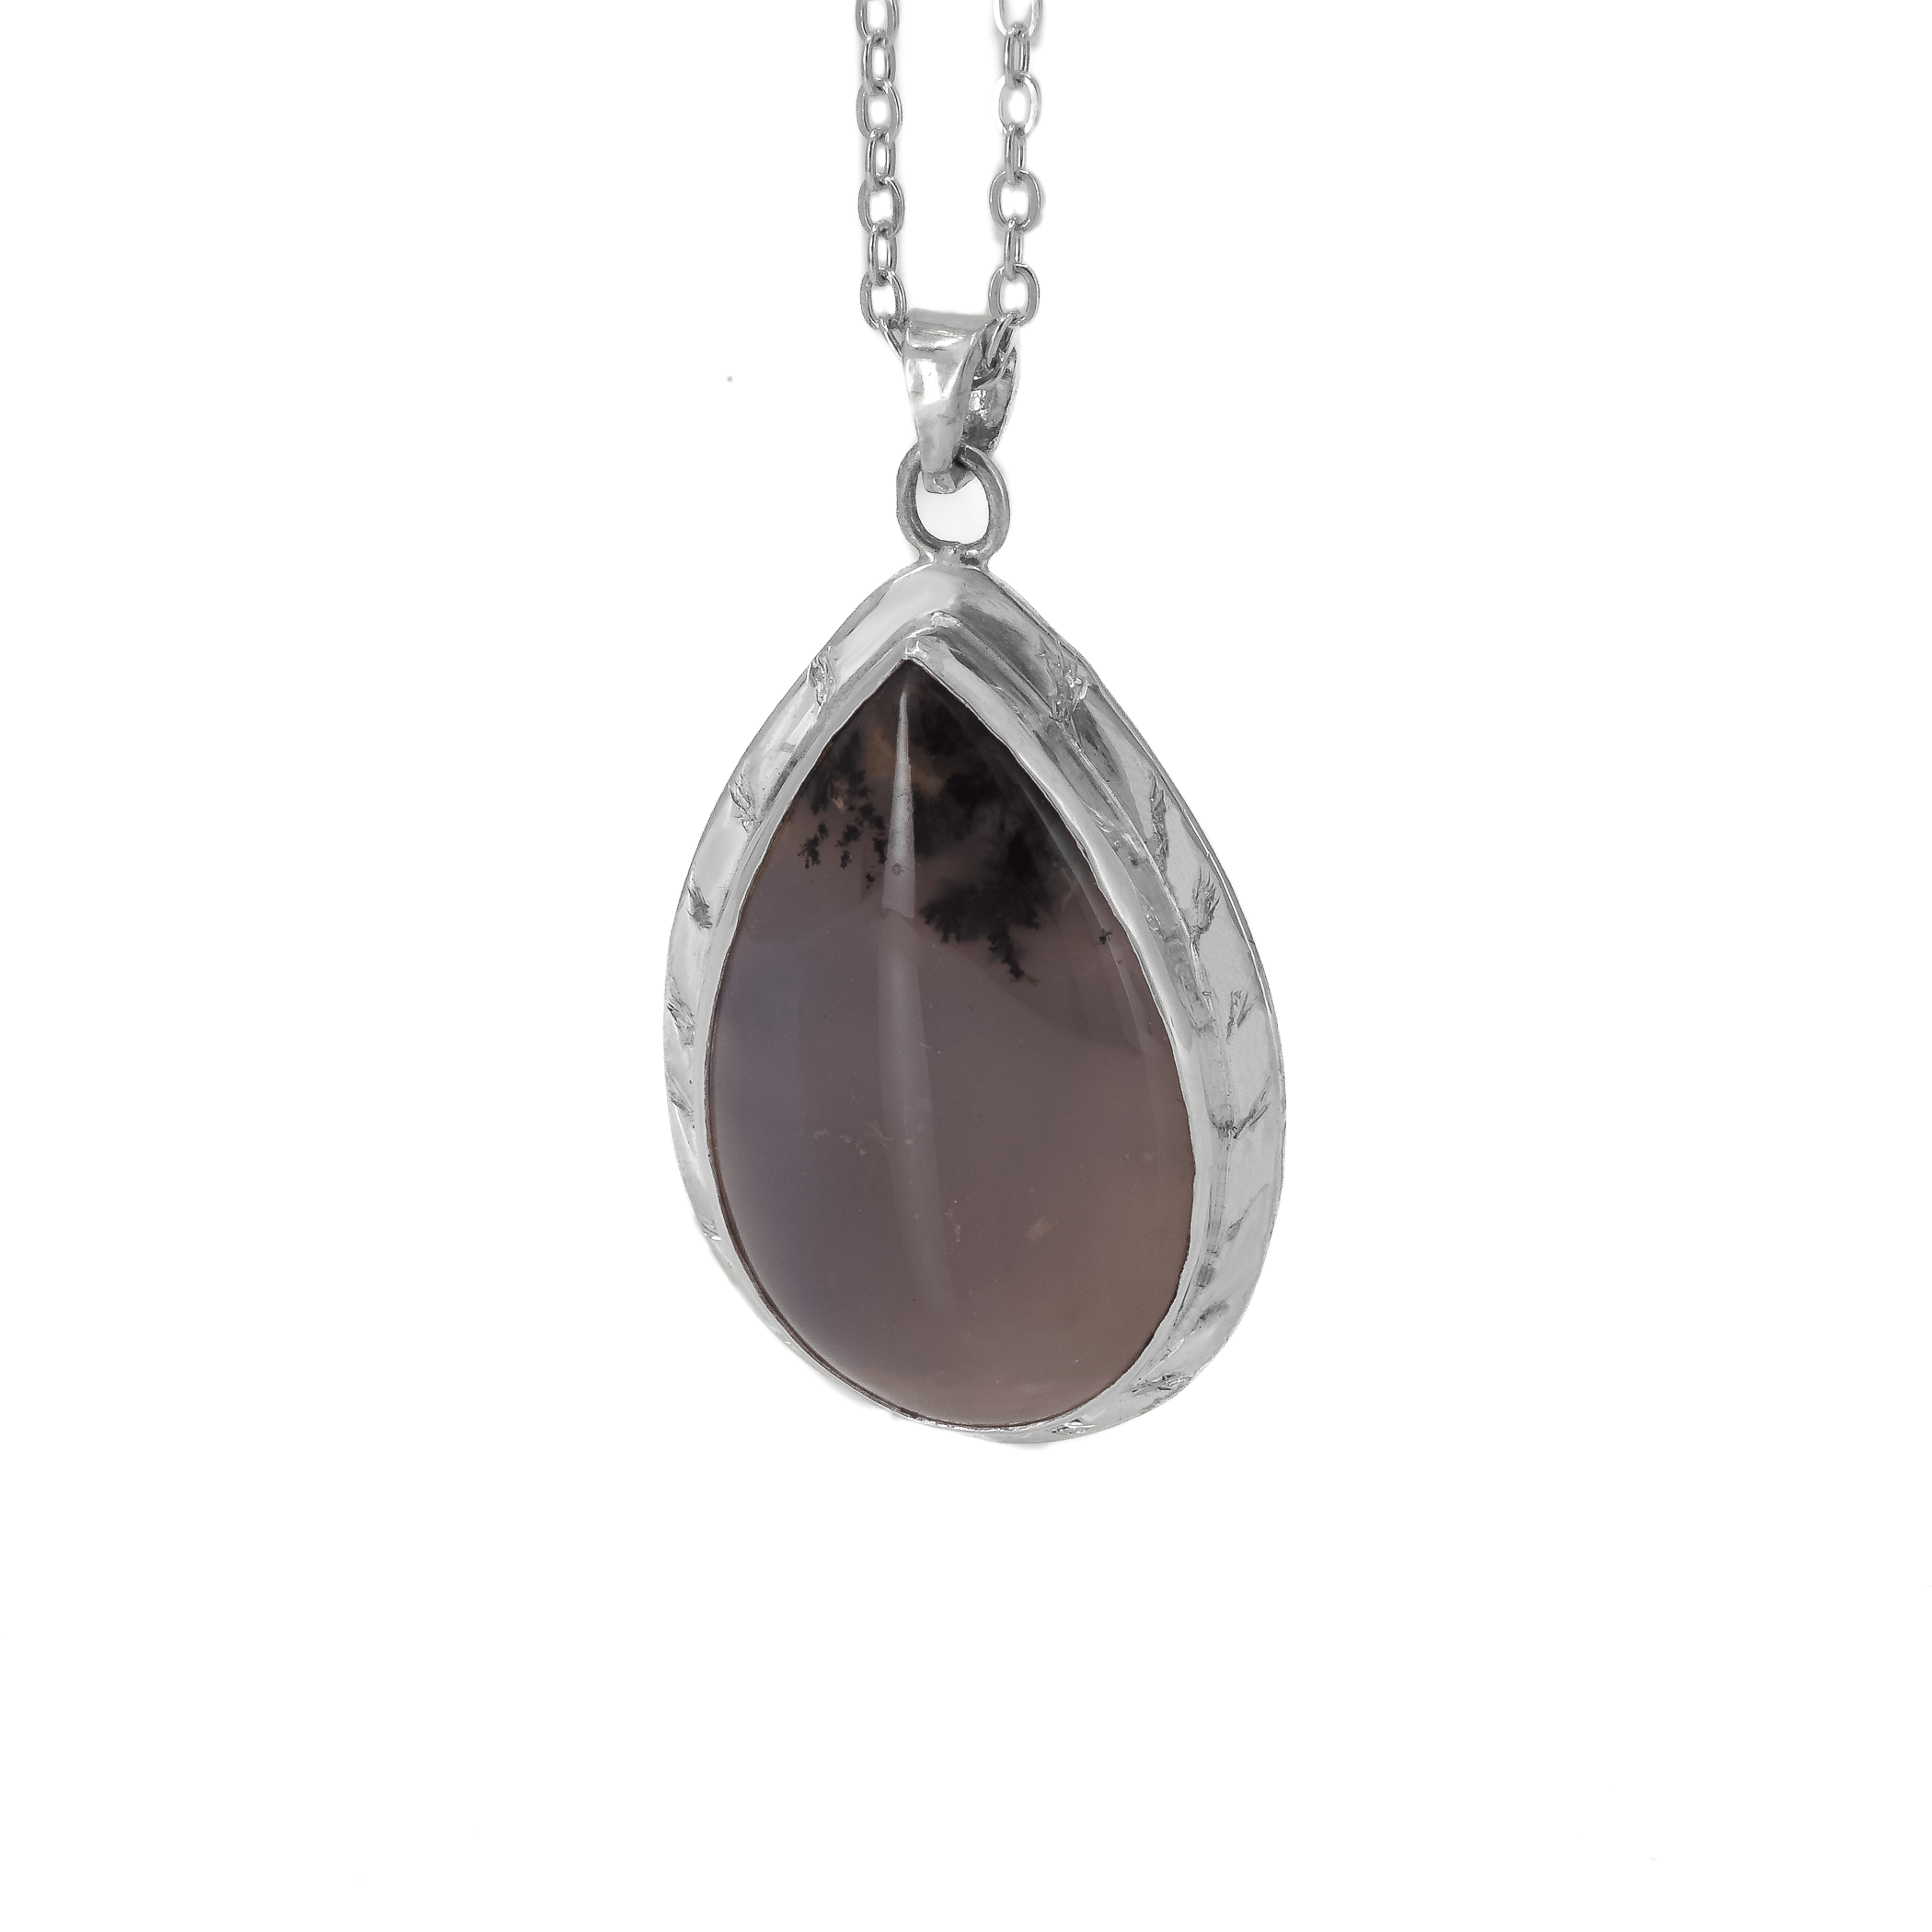 Terardrop amethyst pendant necklace with branch like texture going all around the stone. The stone also has sage inclusions at the top, giving it a more natural look.